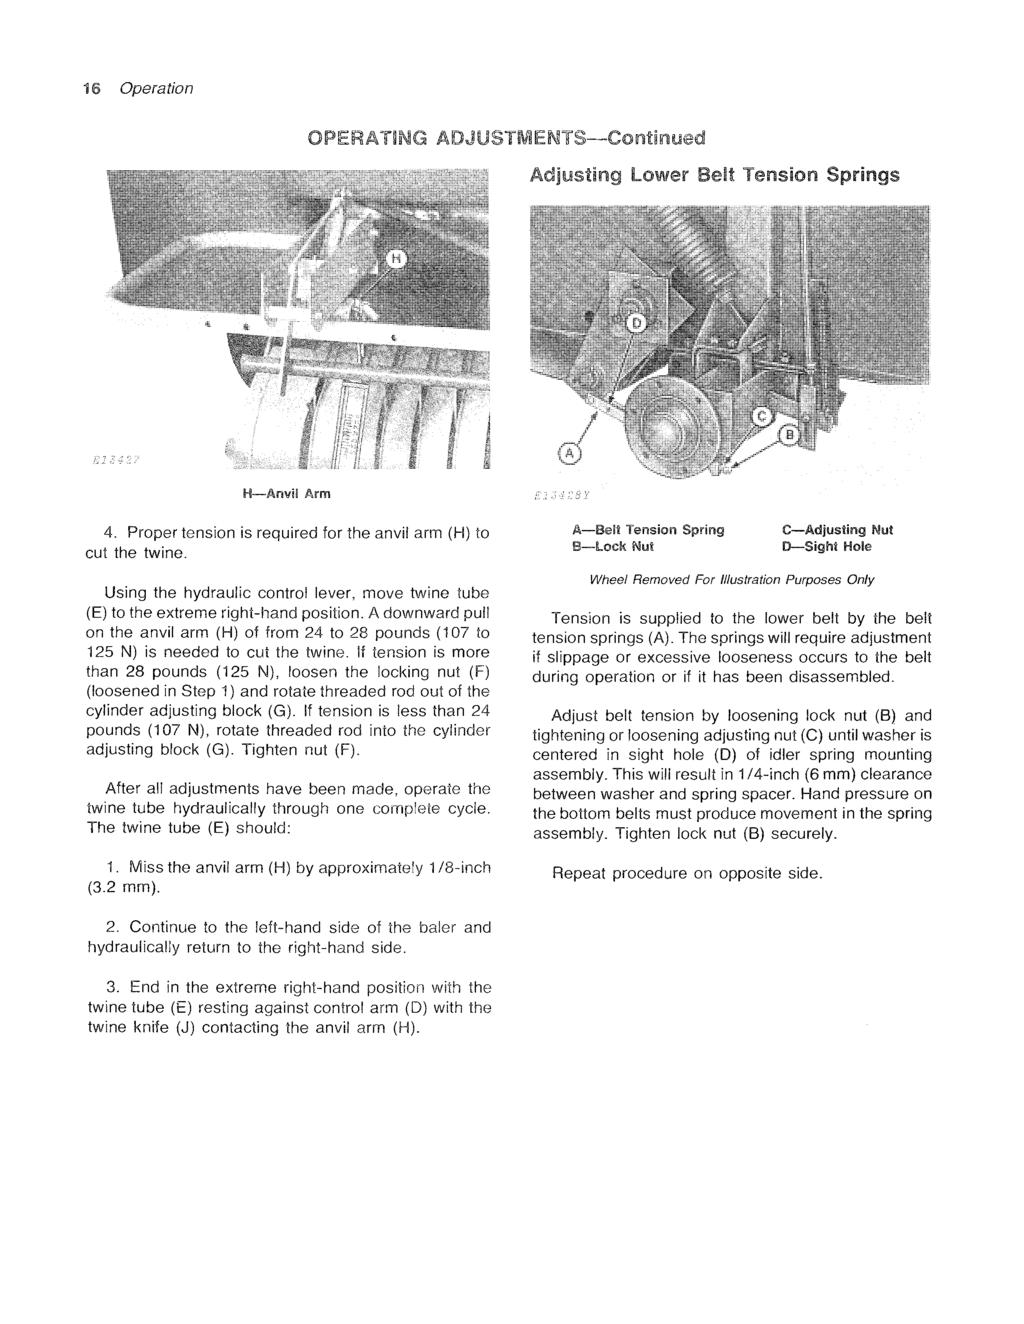 16 Operation OPERATING ADJUSTMENTS-Continued Adjusting lower Belt Tension Springs H-Anvil Arm 4. Proper tension is required for the anvil arm (H) to cut the twine.